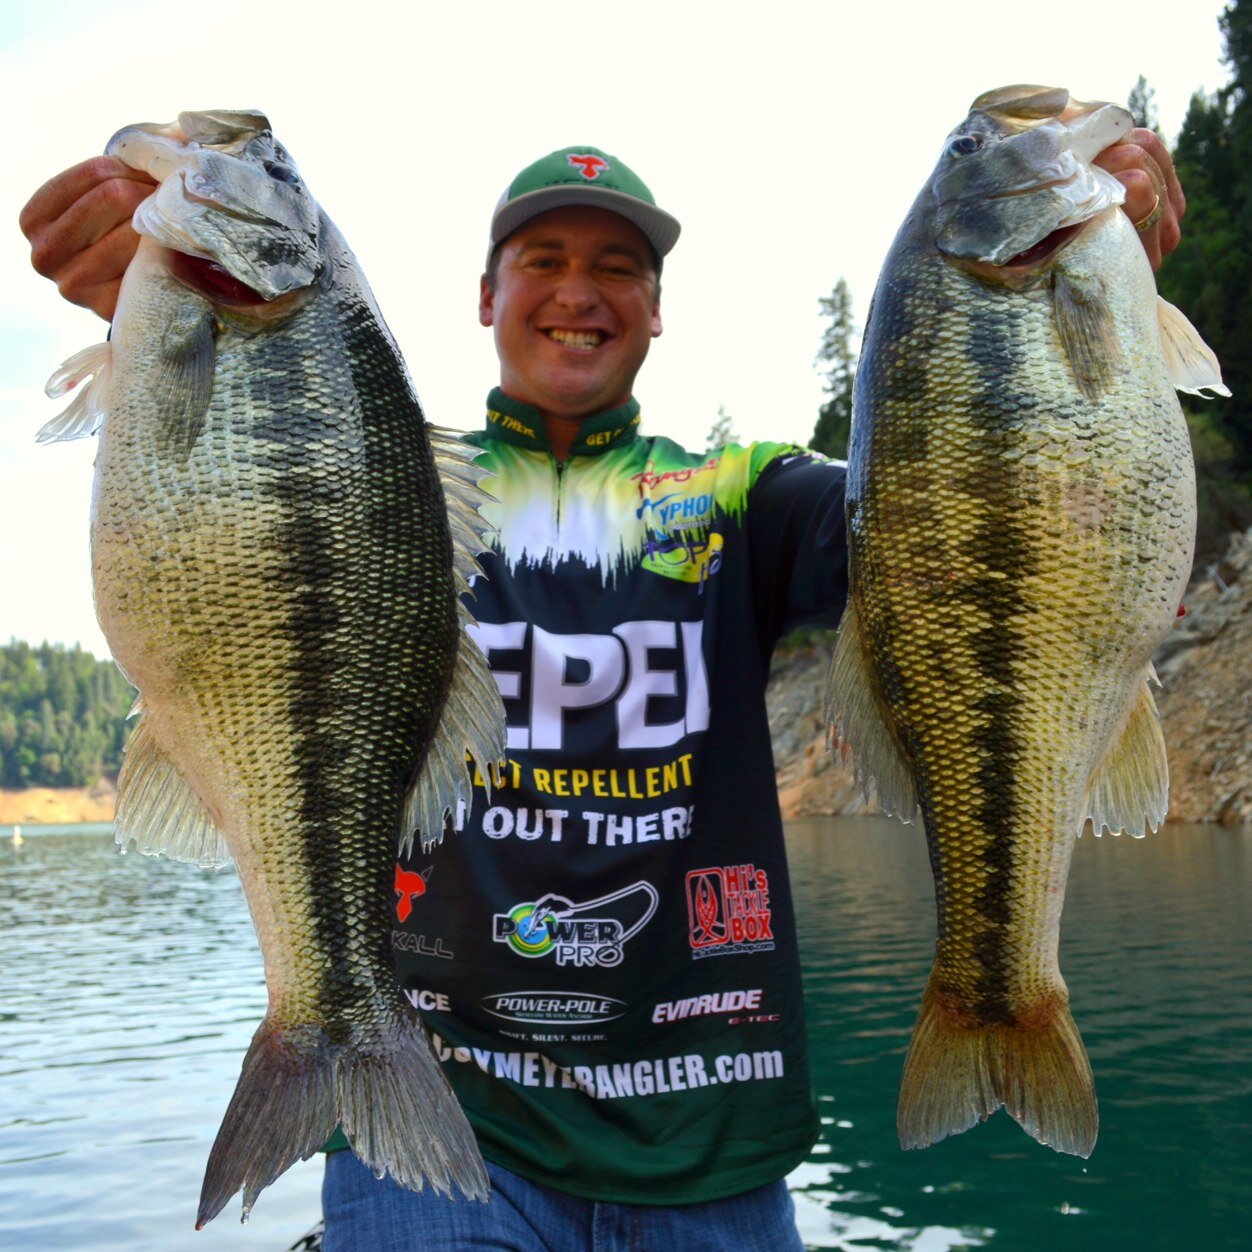 FLW TOUR Angler living my DREAM traveling across the country bass fishing! Instagtam : CodyMeyerAngler - Follow me on Facebook!